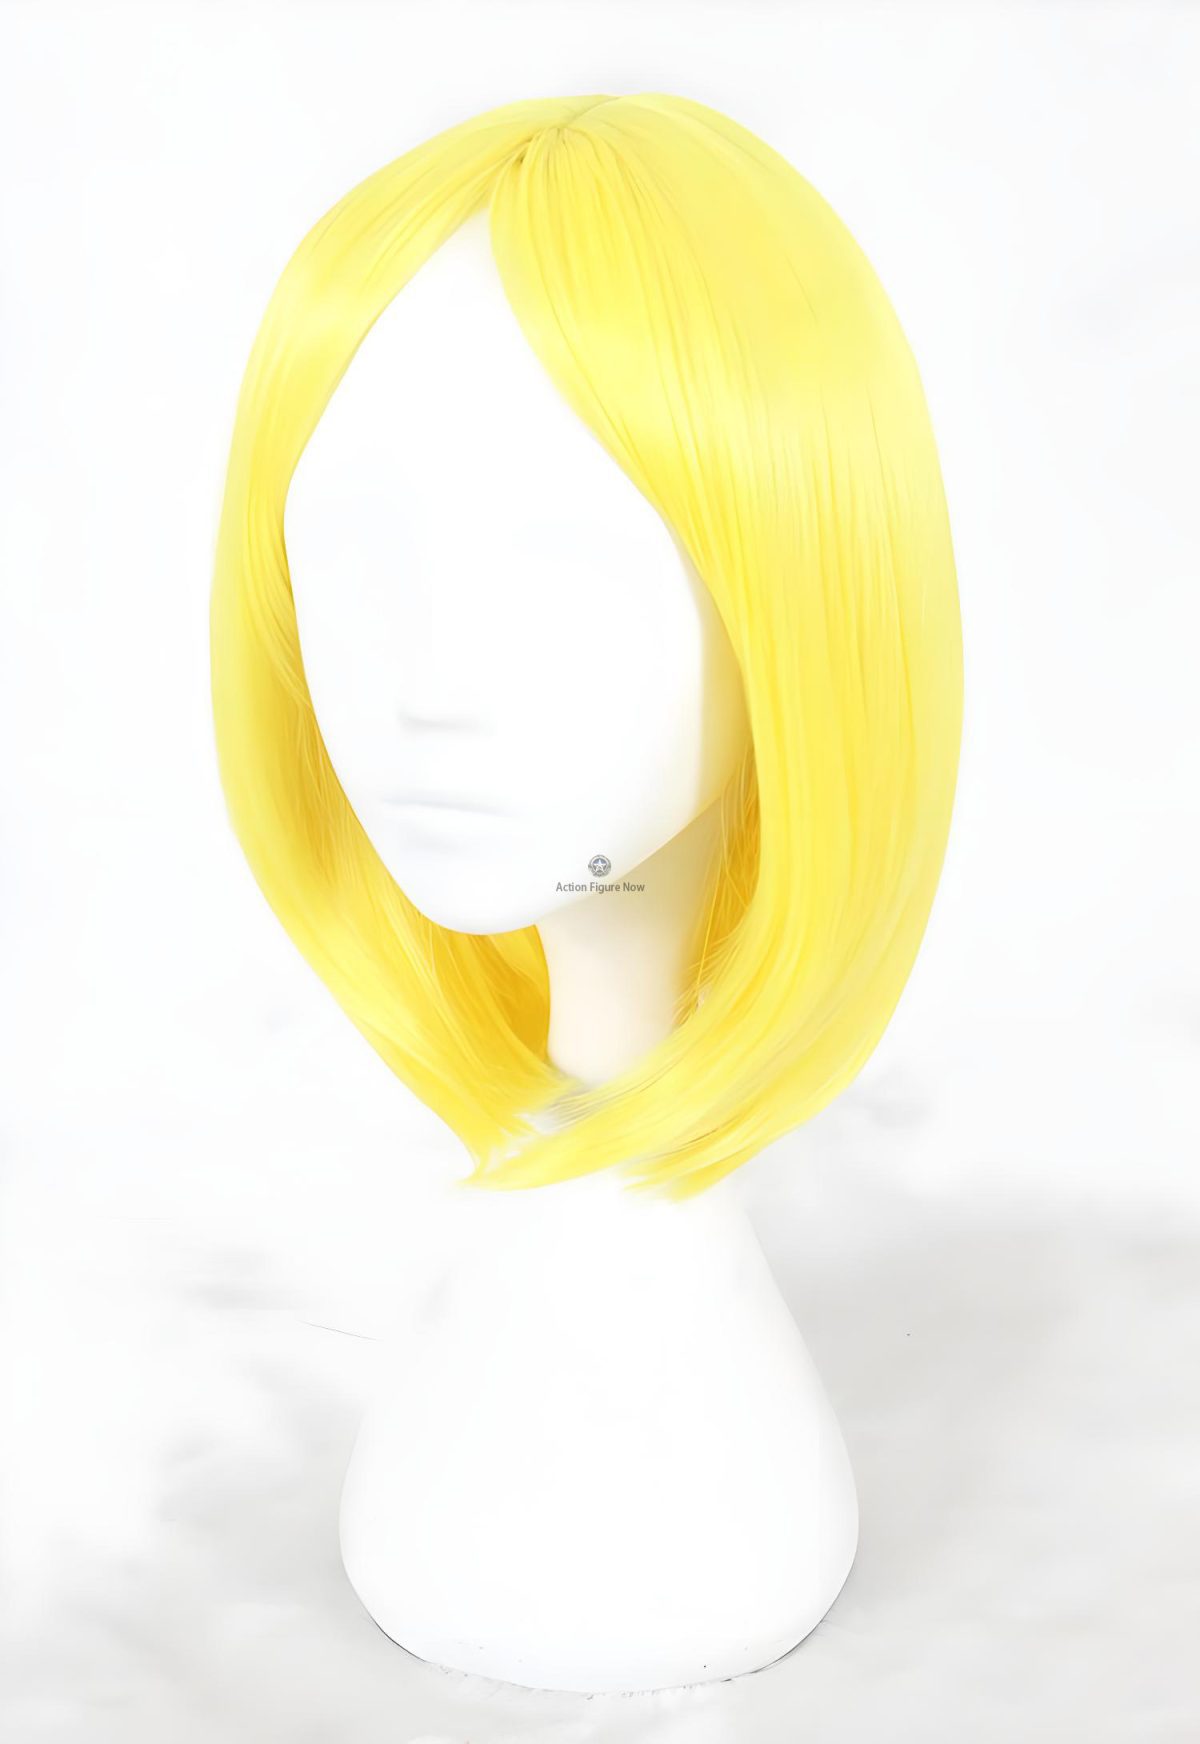 Cosplay Wig - Yellow Diamond from Land of the Lustrous